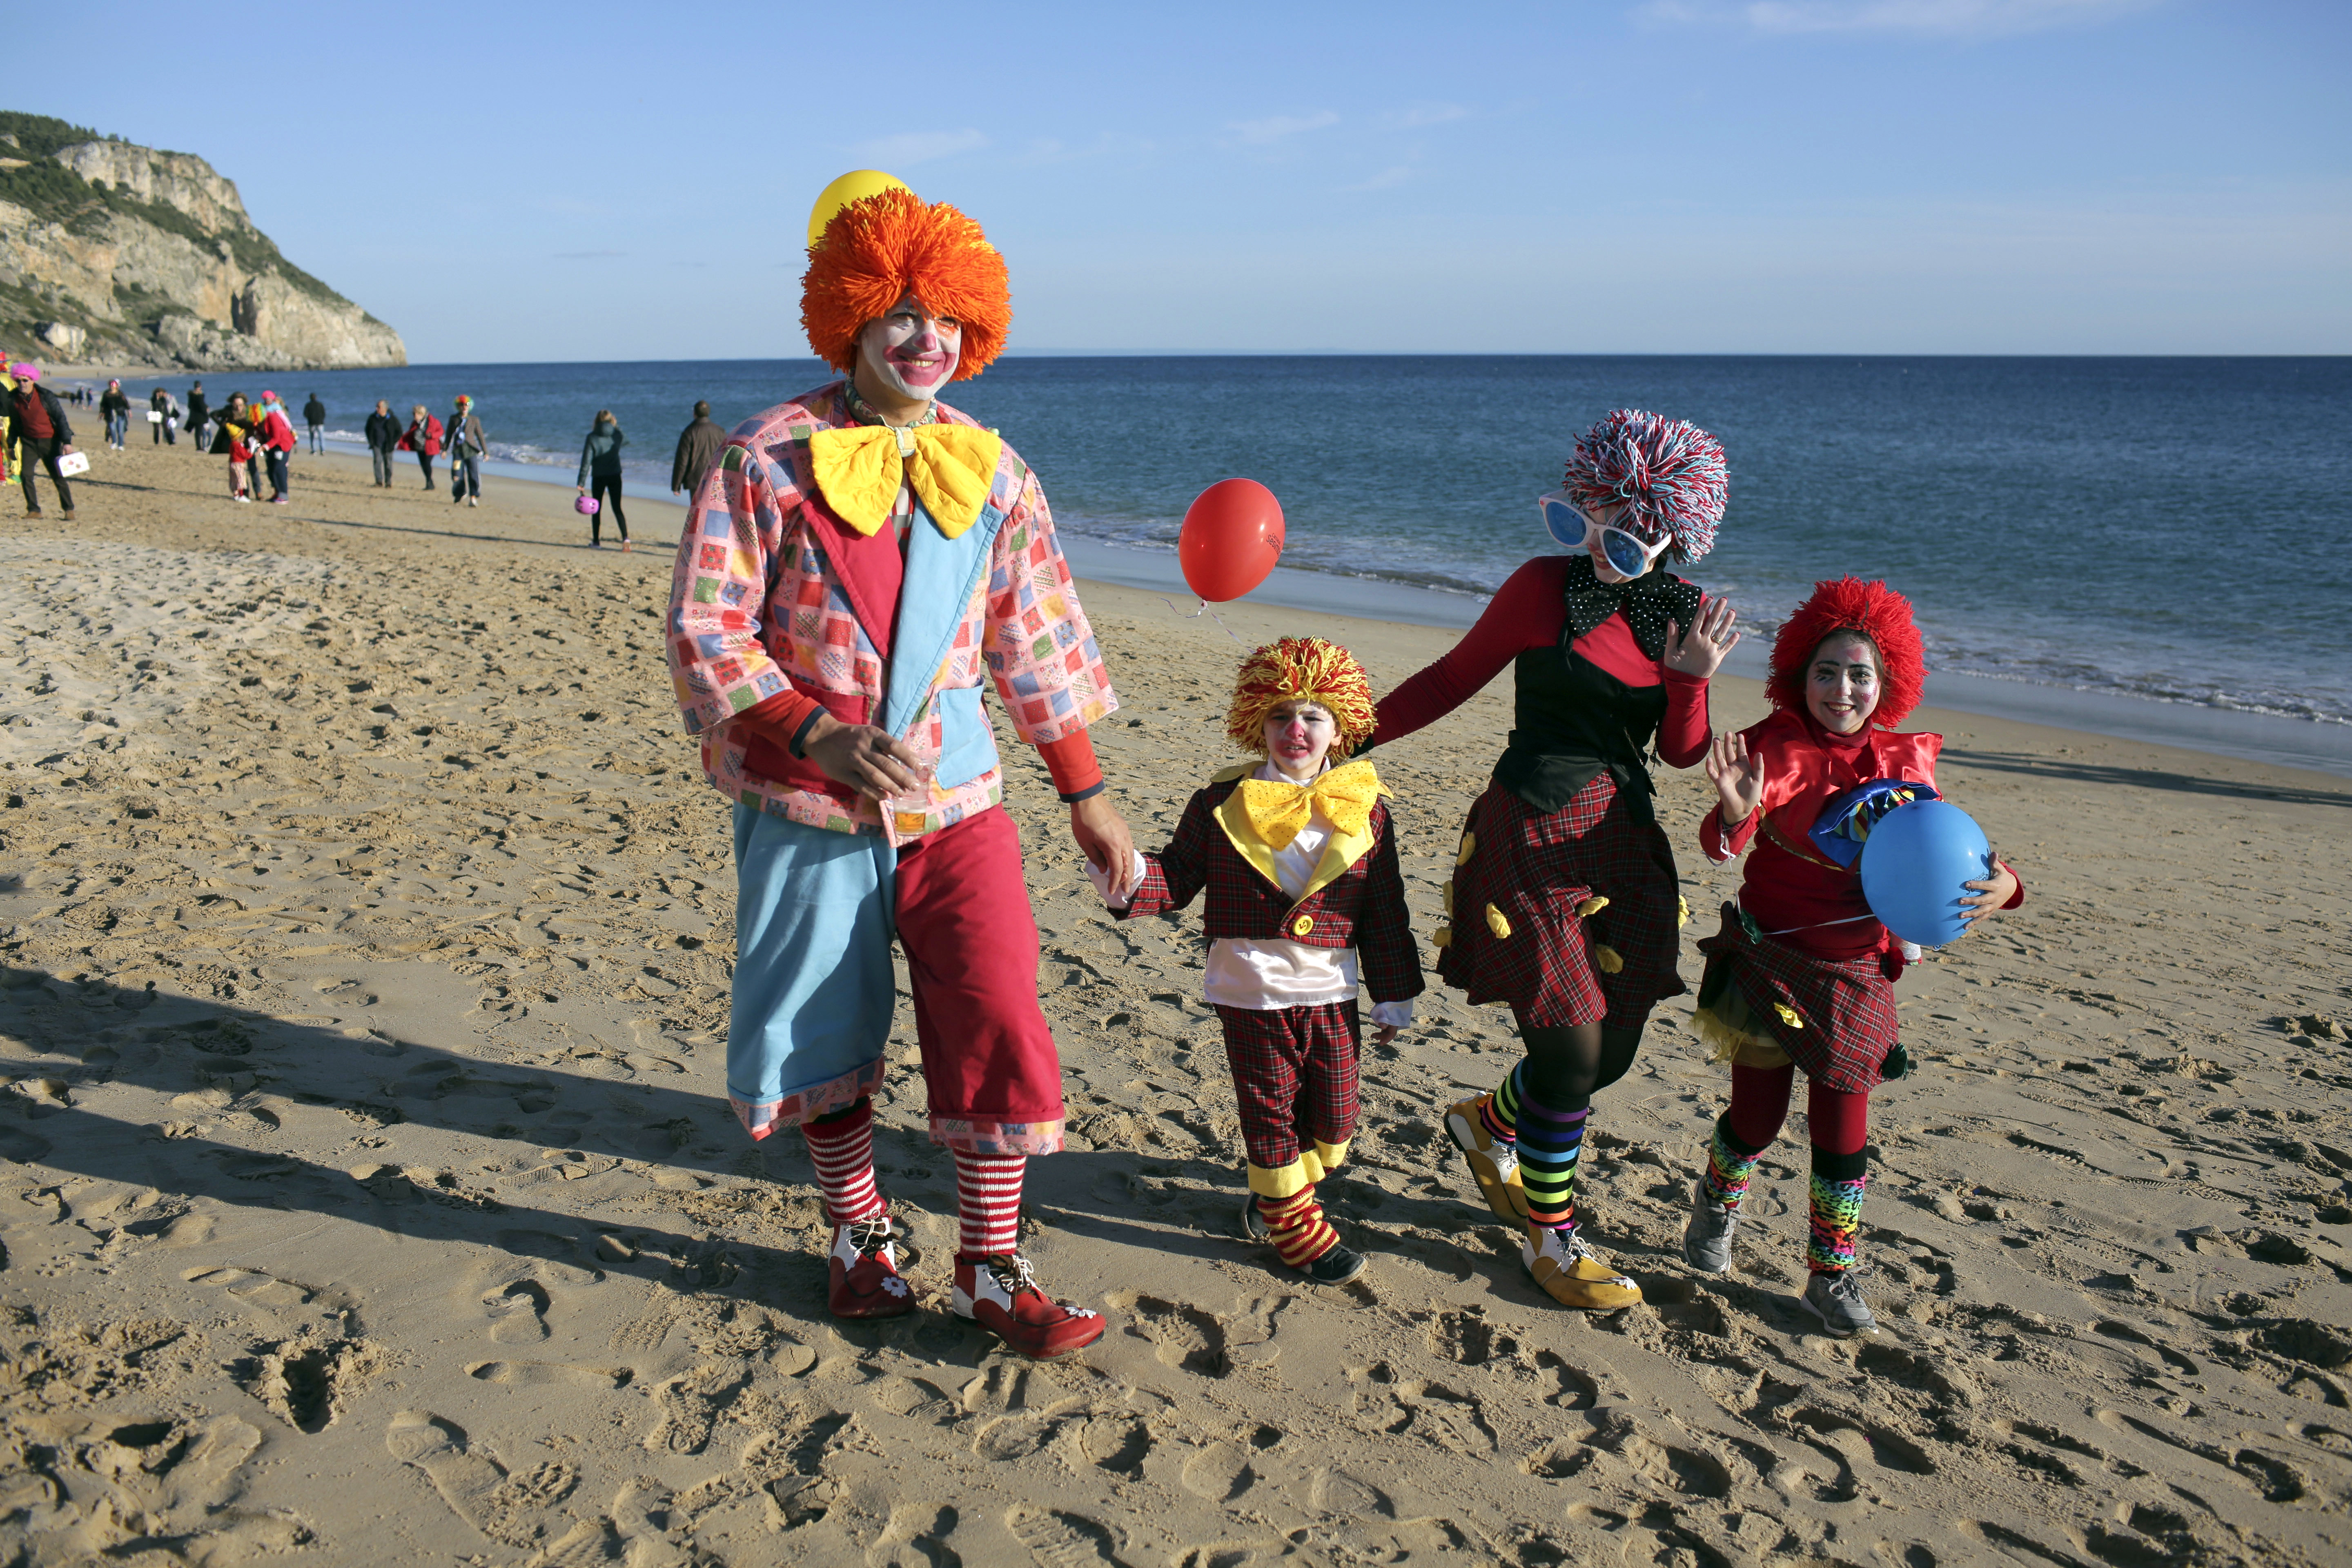 A family waves to the camera while walking on the beach after taking part in the Carnival Clowns' Parade along the waterfront in Sesimbra, south of Lisbon, Monday, Feb. 12, 2018. Every year on Carnival Monday thousands dress as clowns to take part in the fishing town's parade. (AP Photo/Armando Franca)